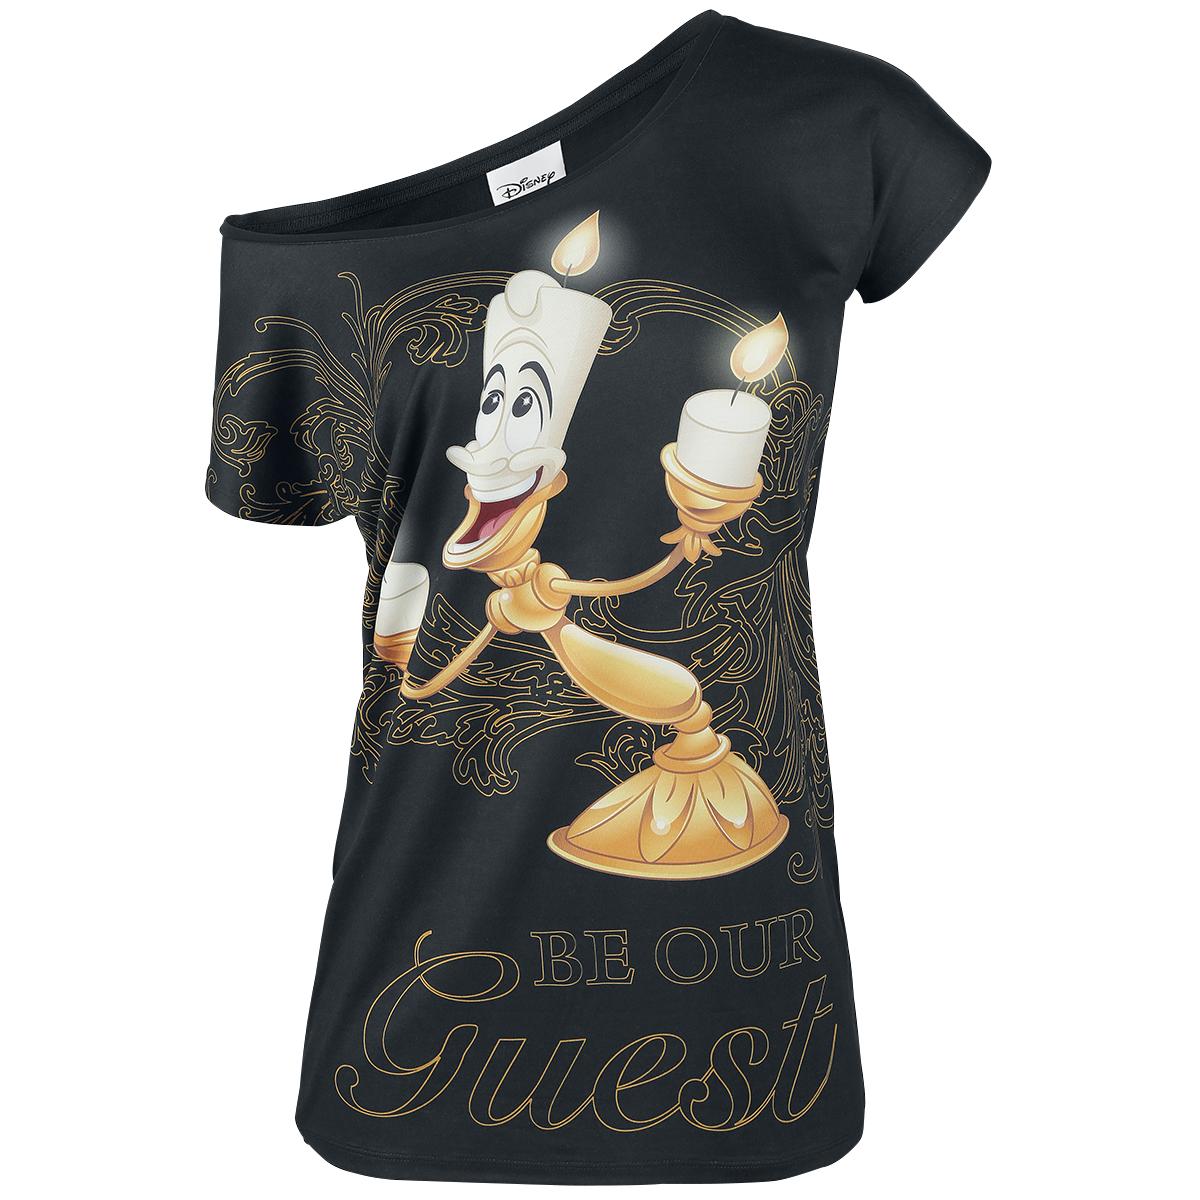 Be Our Guest T-shirt Design woman tee